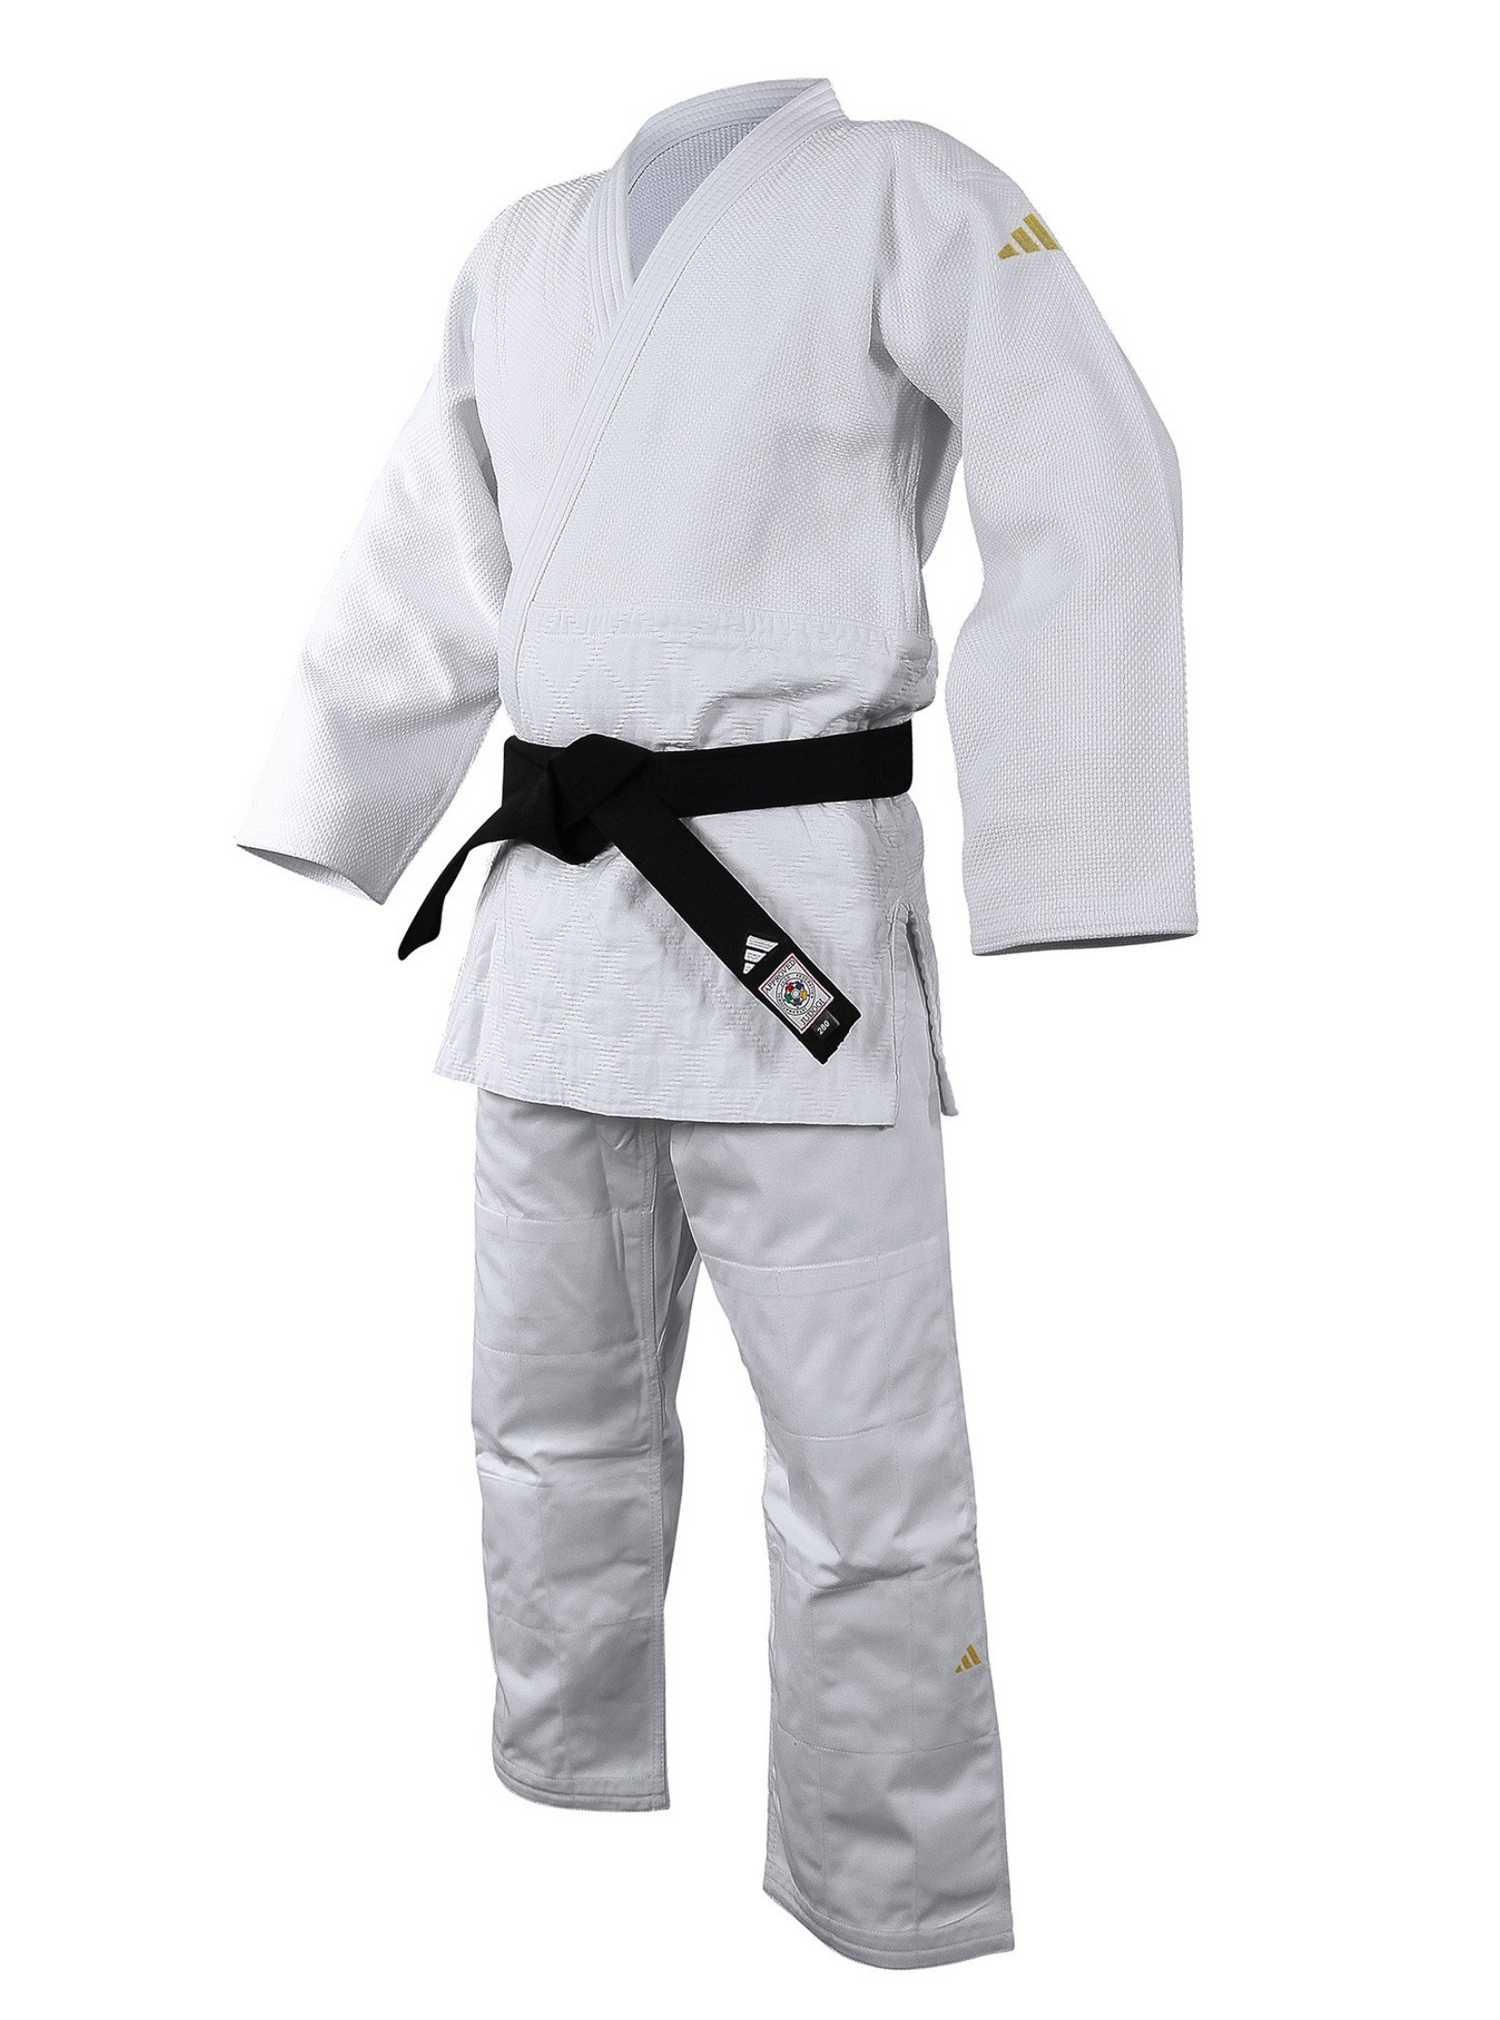 Adidas IJF Champion 3 Regular Fit White for 2023 with Gold Logo